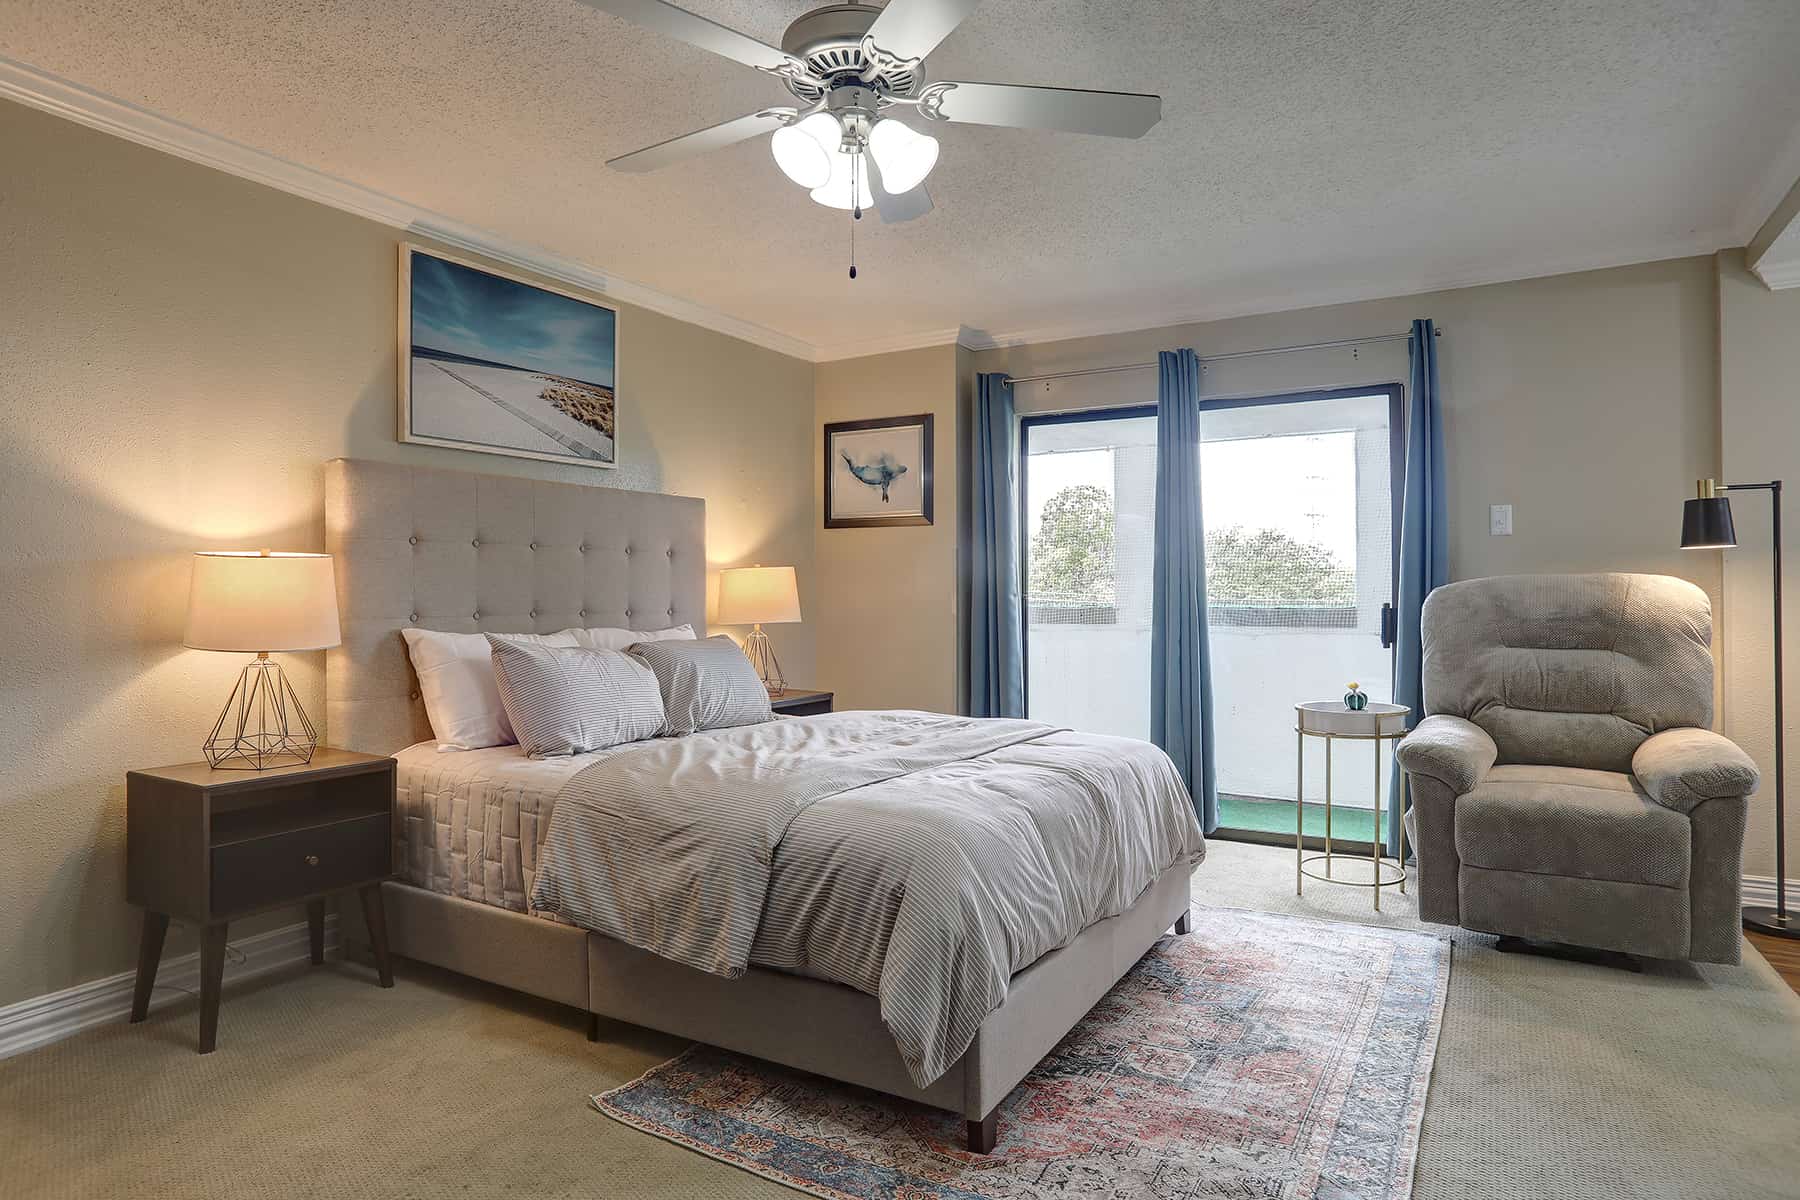 Furnished assisted living bedroom for dallas area seniors